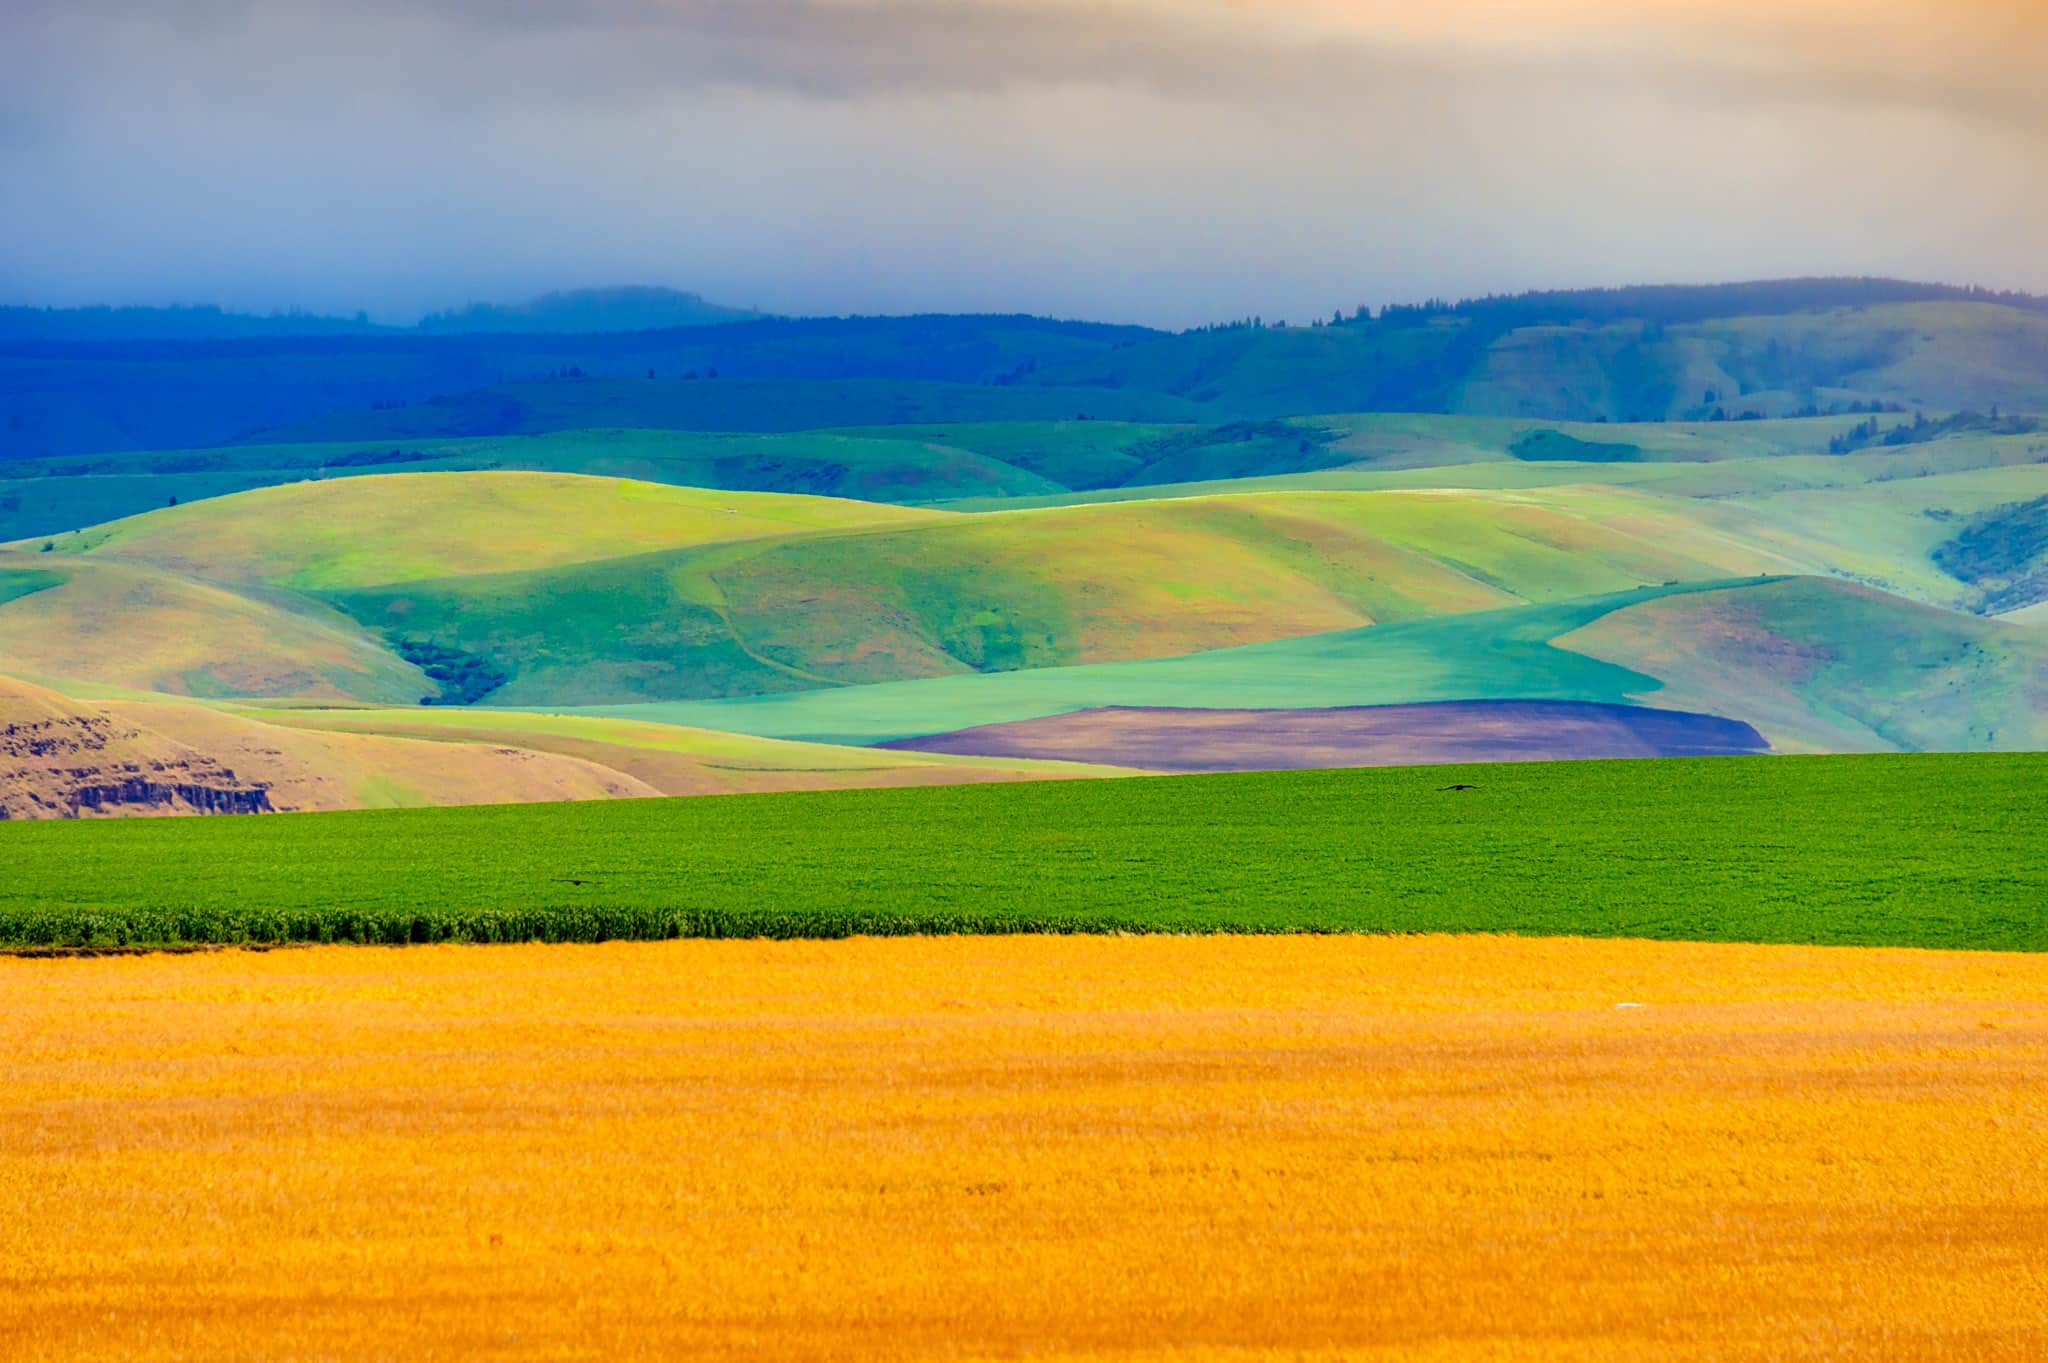 This view of the rolling Palouse hills was taken from the access road to Steptoe Butte in Steptoe Butte State Park near Colfax, Washington. From the Palouse Region portfolio.